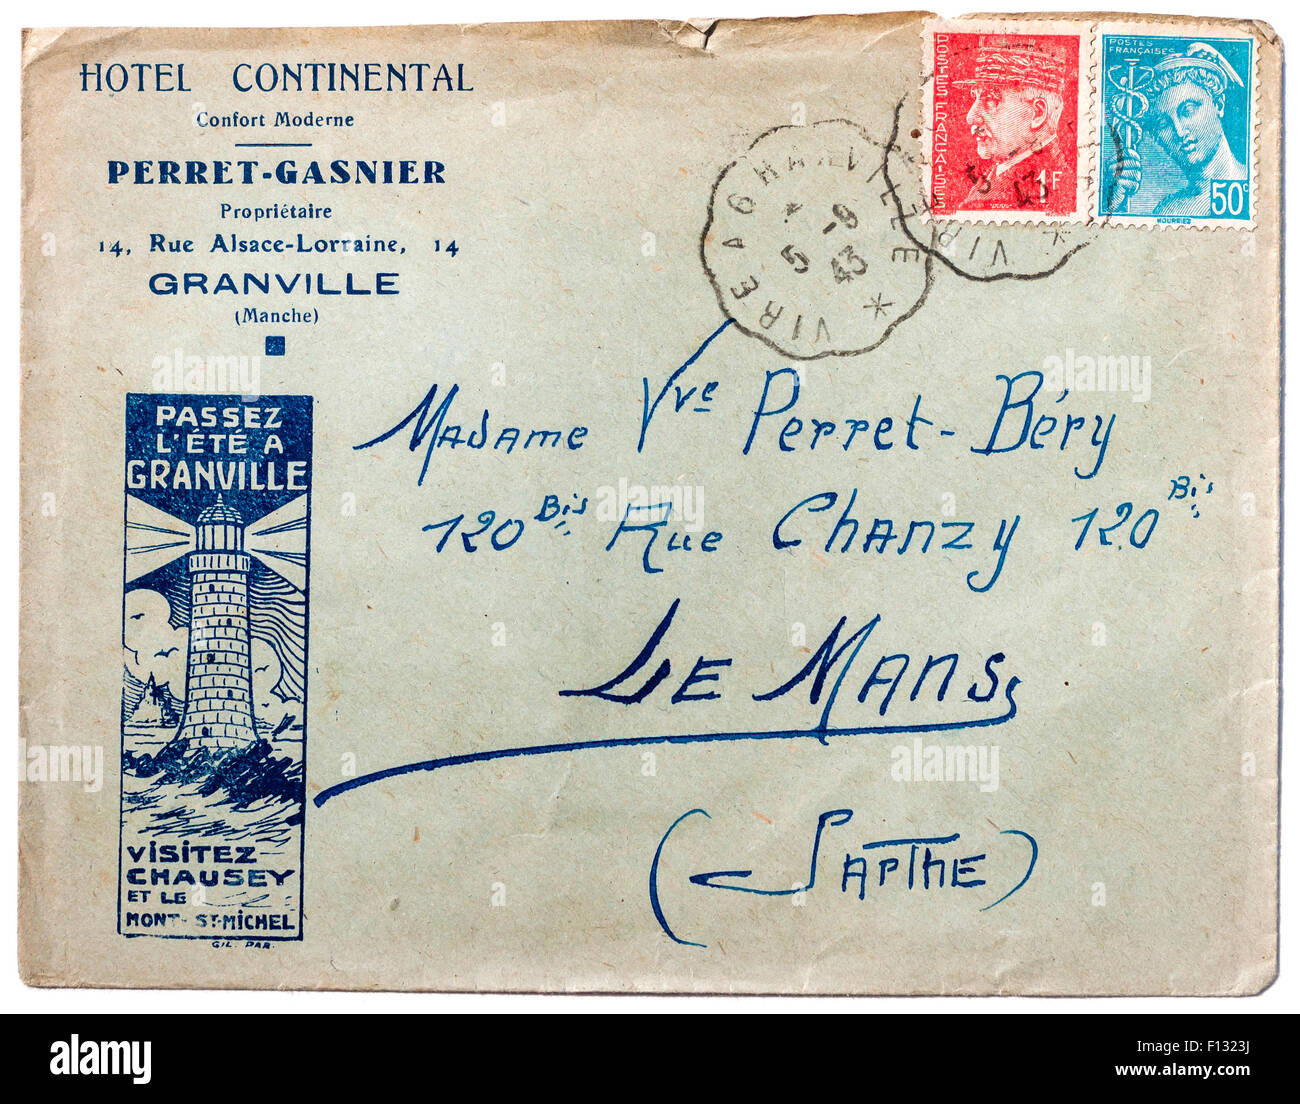 Old 1947 French letter with lighthouse hotel advert - France. Stock Photo